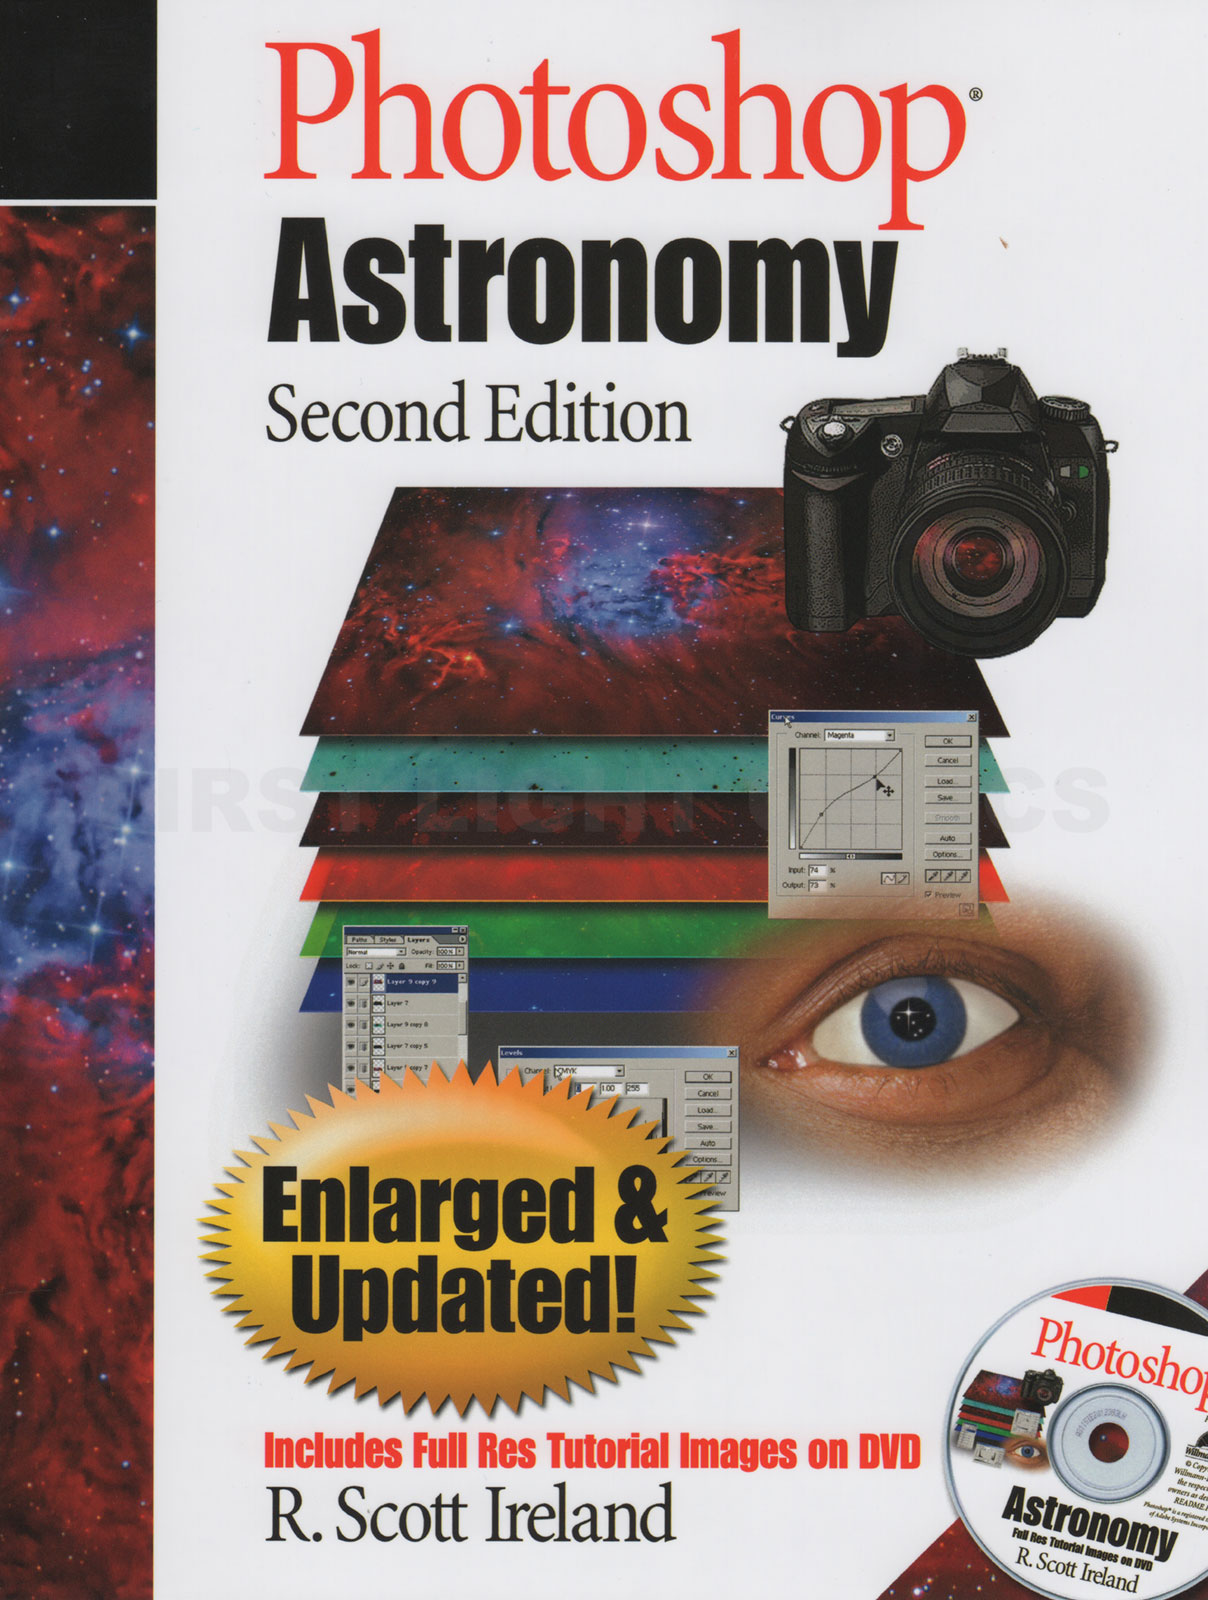 Photoshop Astronomy  (Second Edition) Book